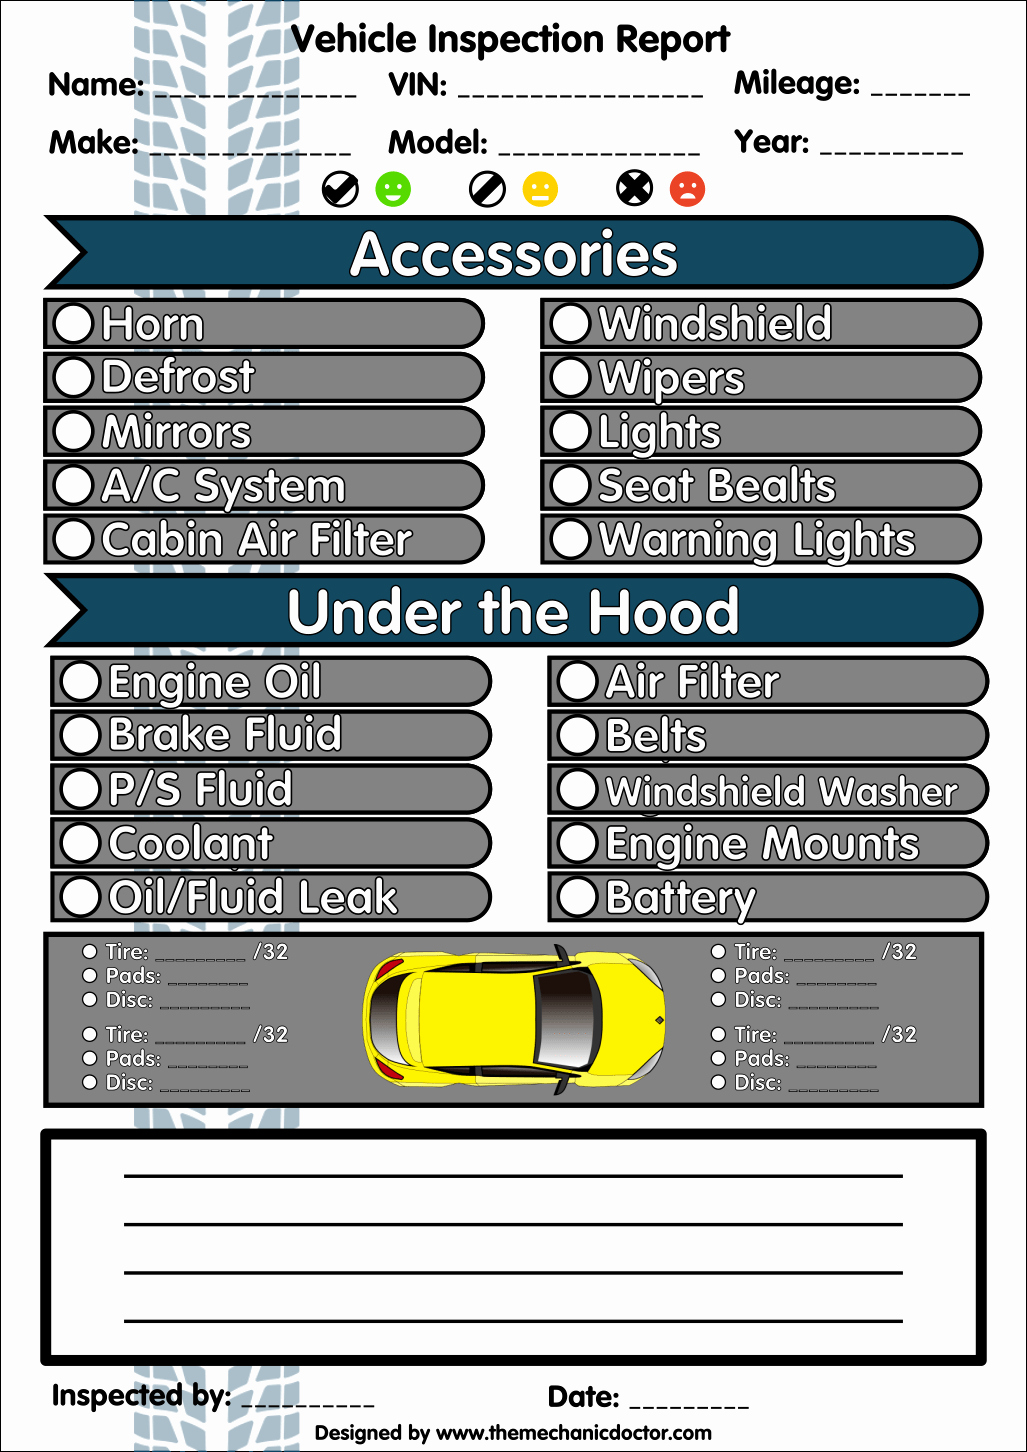 Vehicle Safety Inspection Checklist Template Best Of 6 Free Vehicle Inspection forms Modern Looking Checklists for today S Auto Mechanic